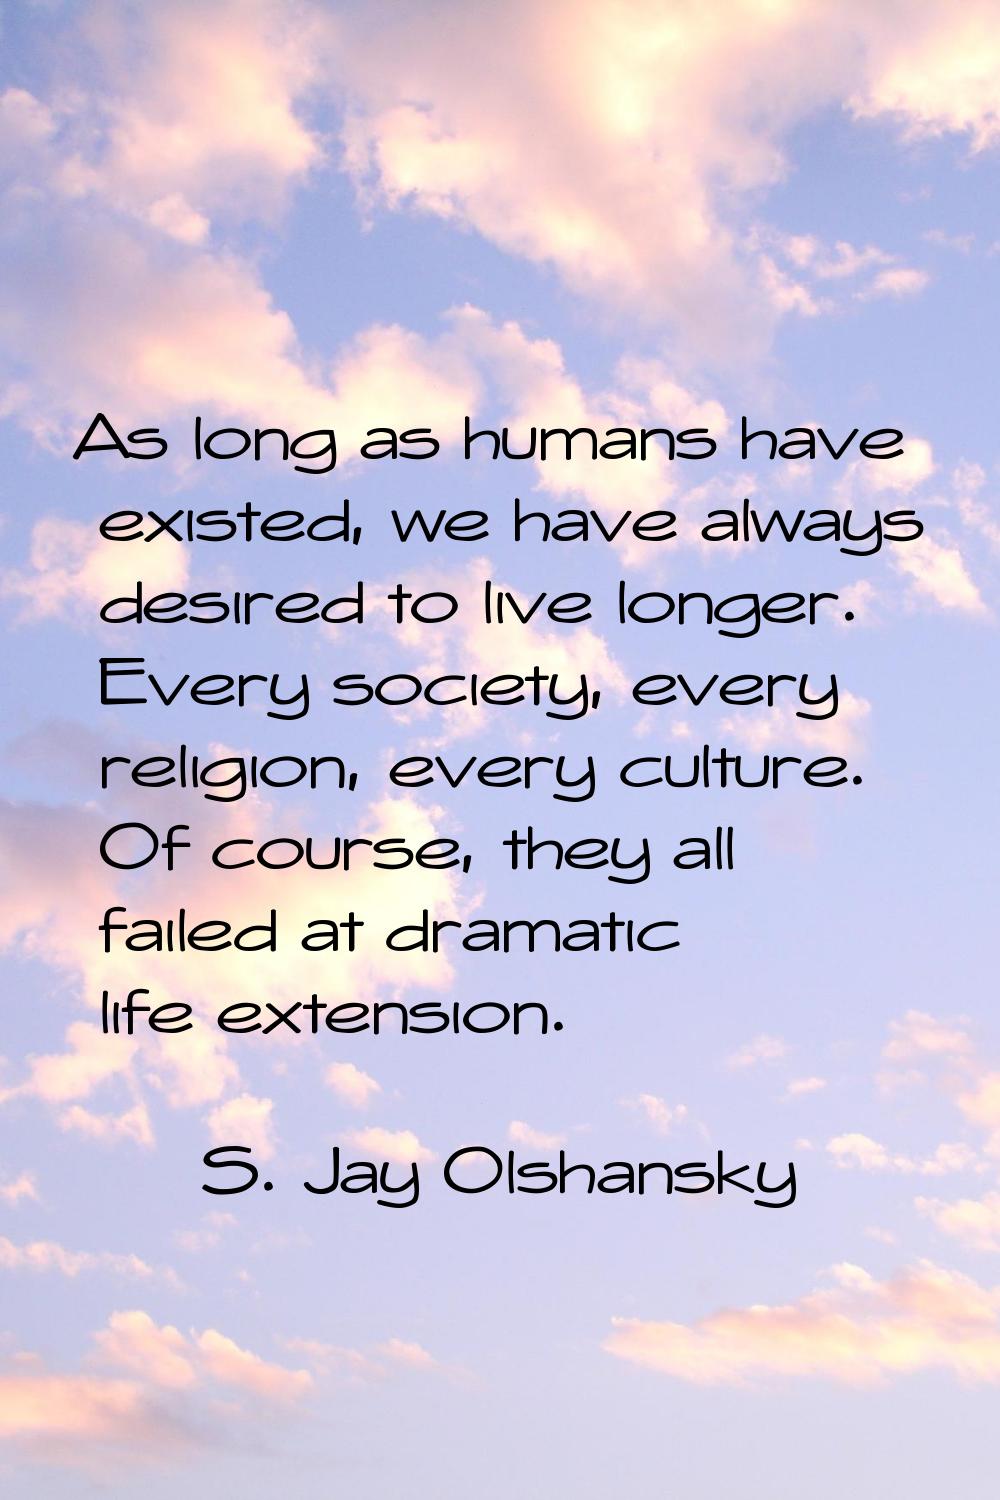 As long as humans have existed, we have always desired to live longer. Every society, every religio